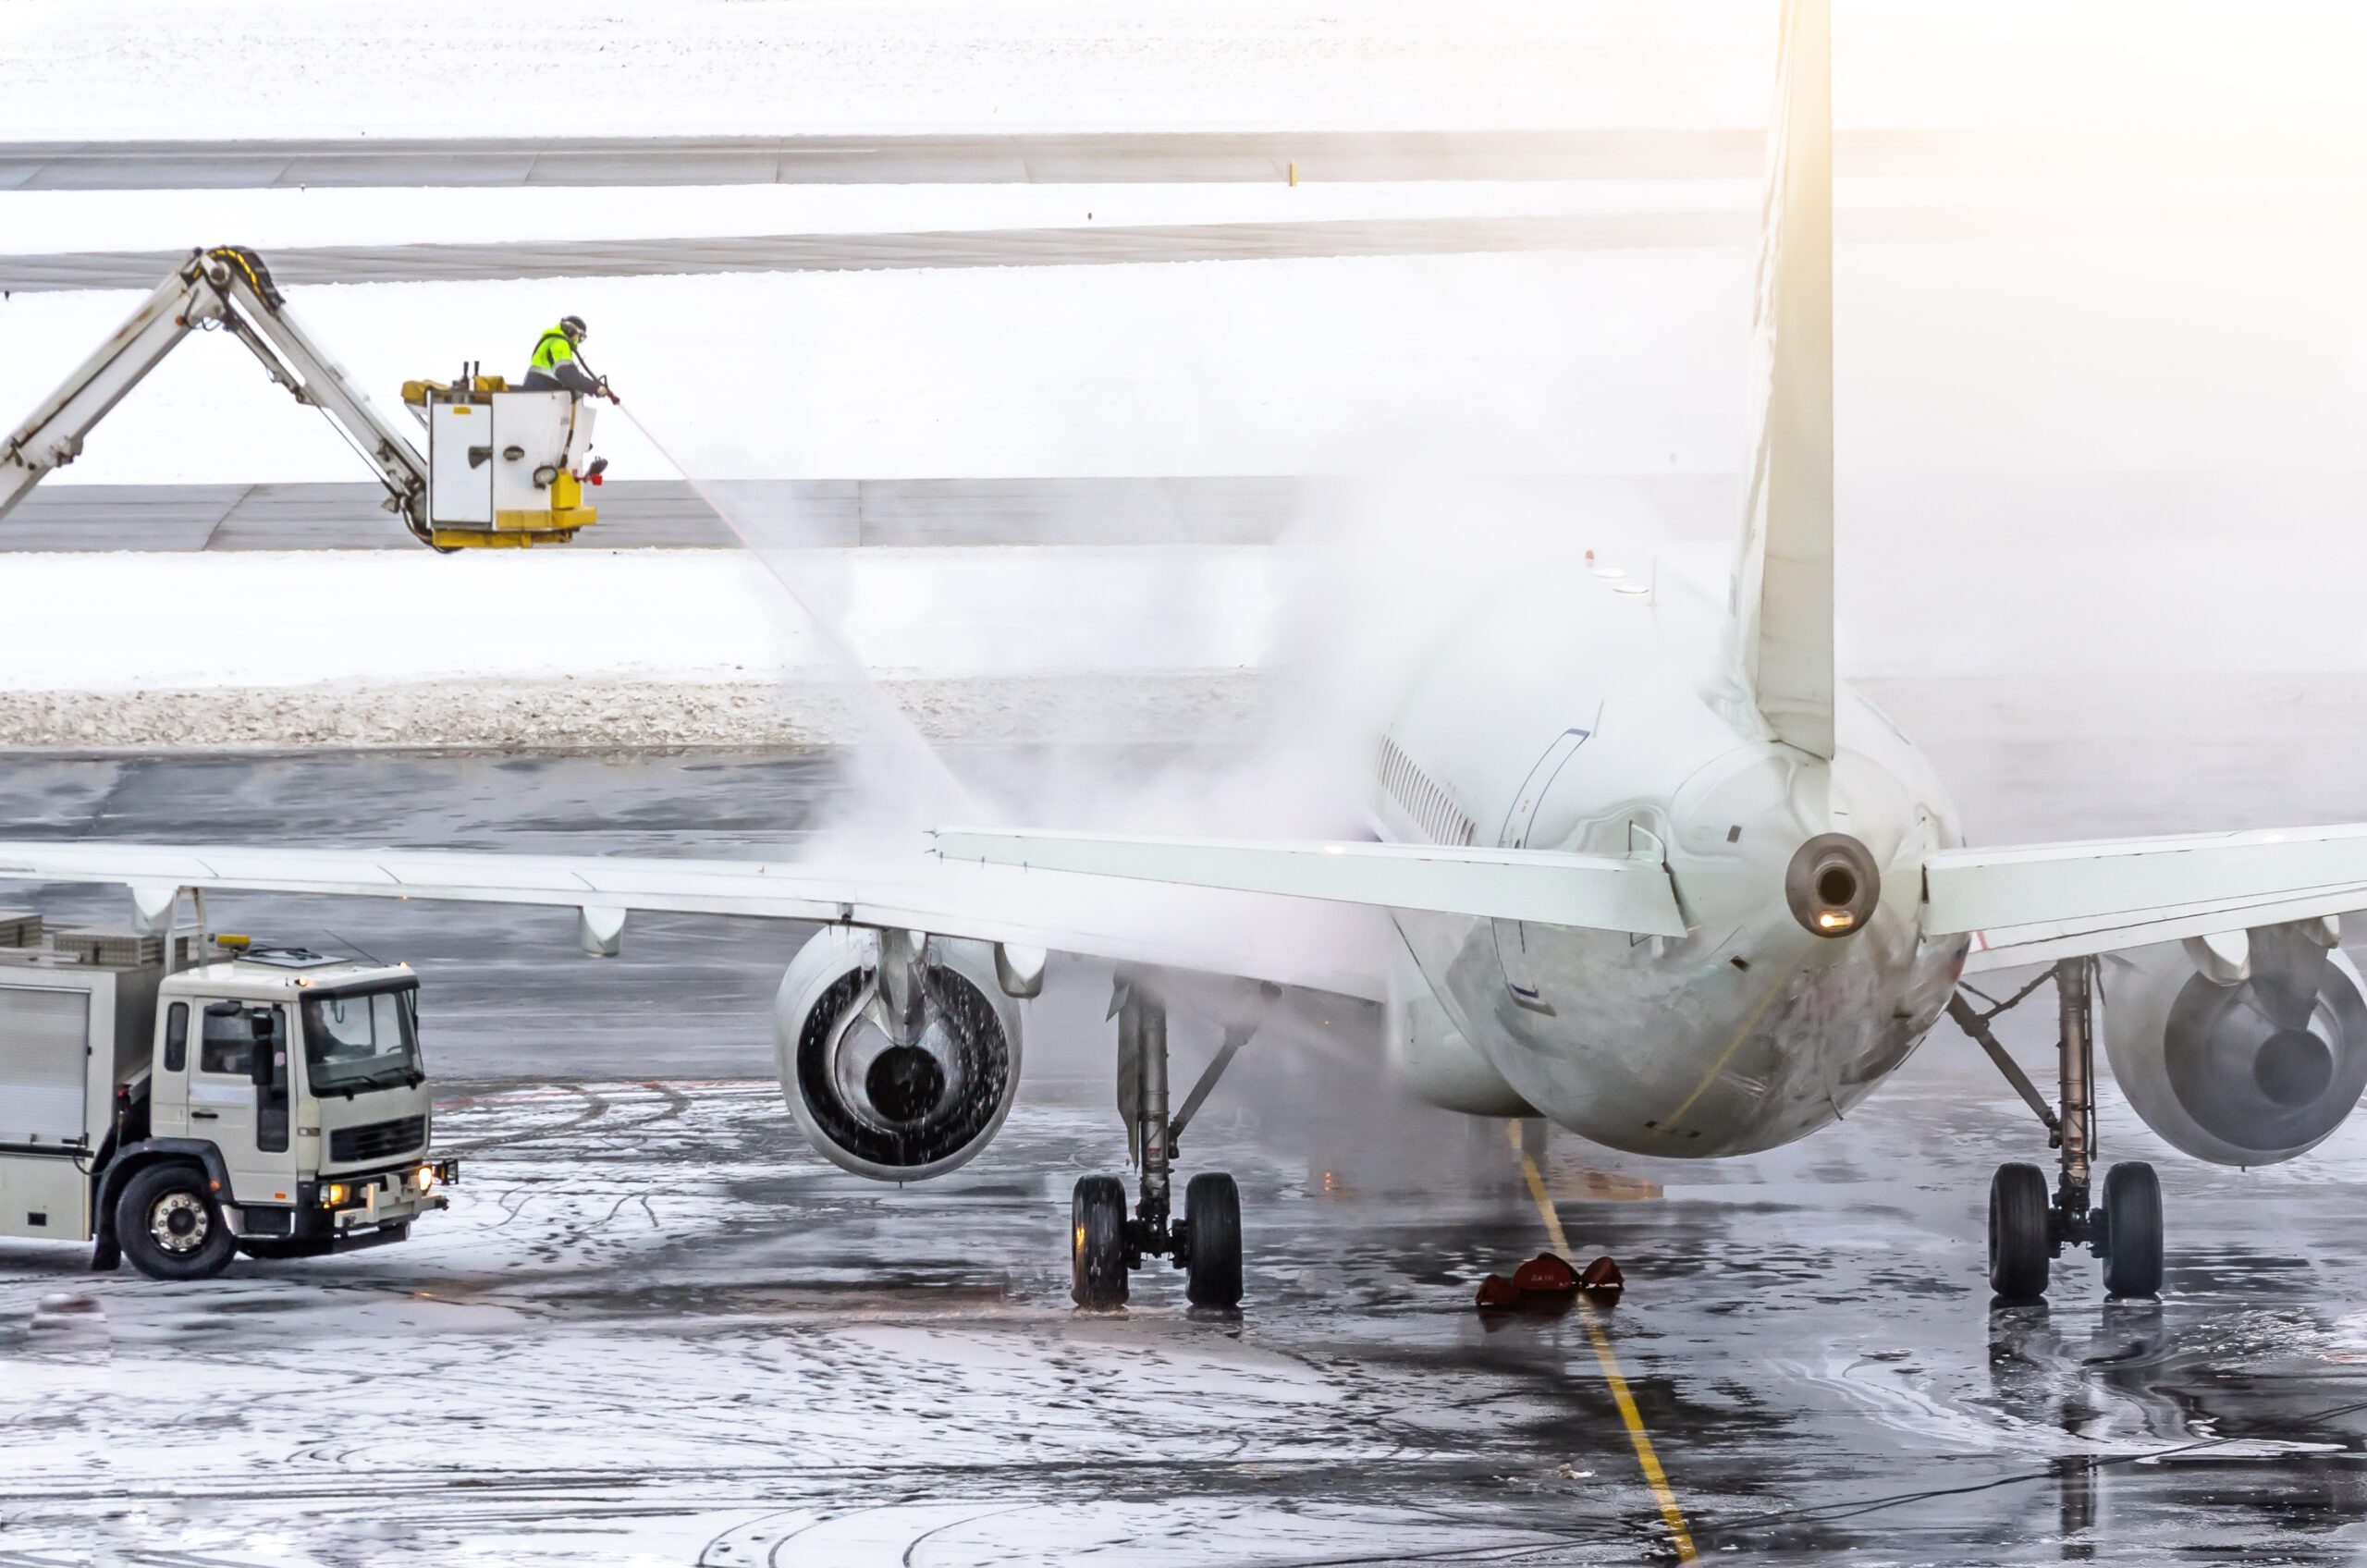 Air Canada to Test Self-Heating De-Icing Strips That Could